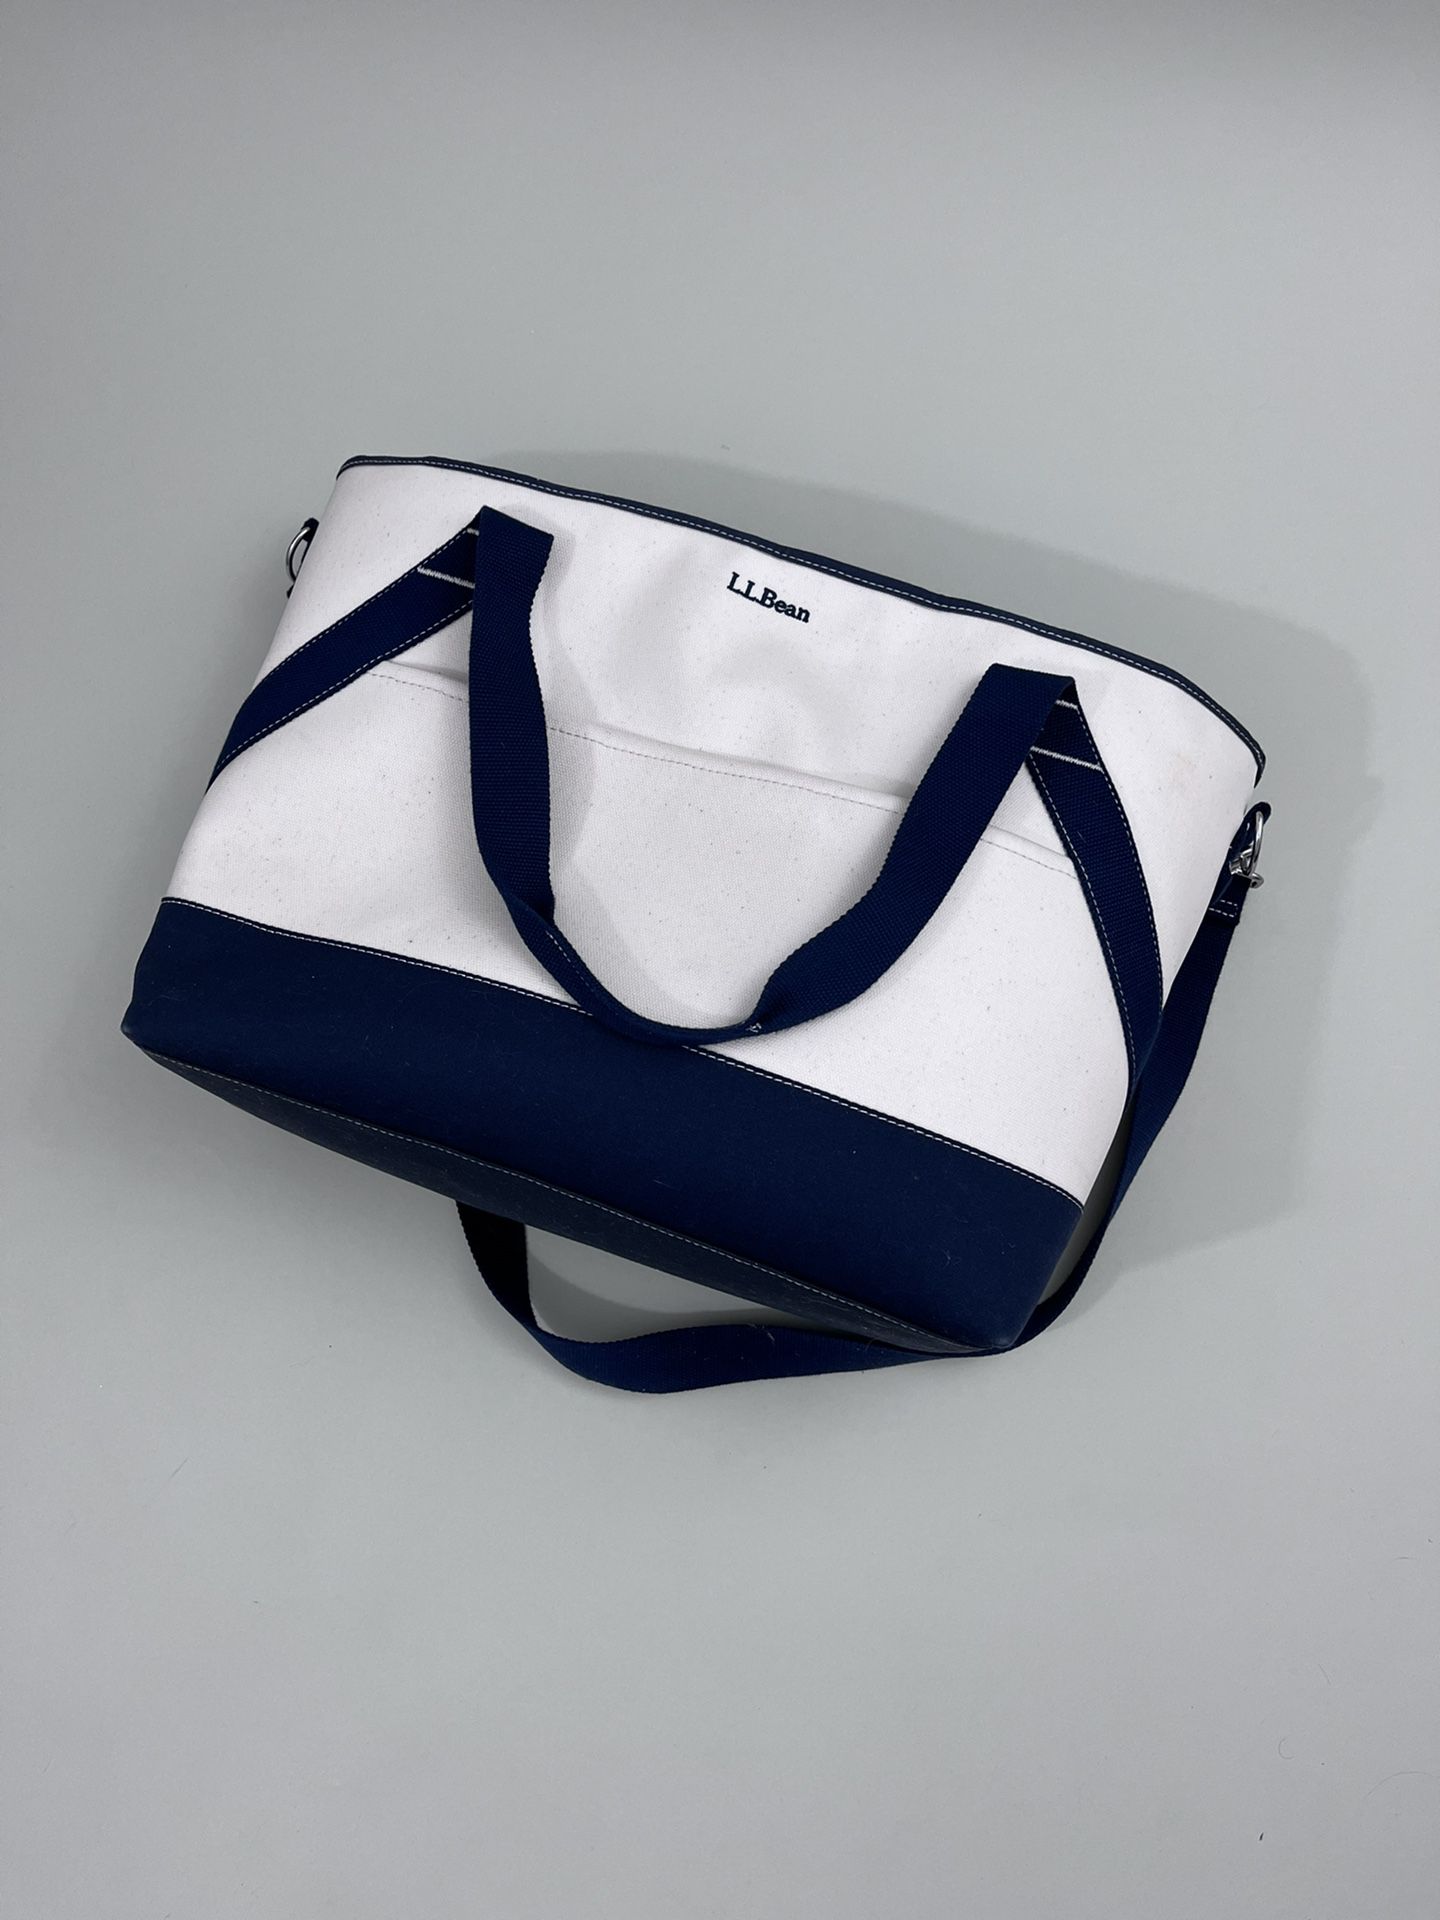 L.L. Bean Insulated Cool Bag Tote Navy & White Picnic Camping Leak Proof Large